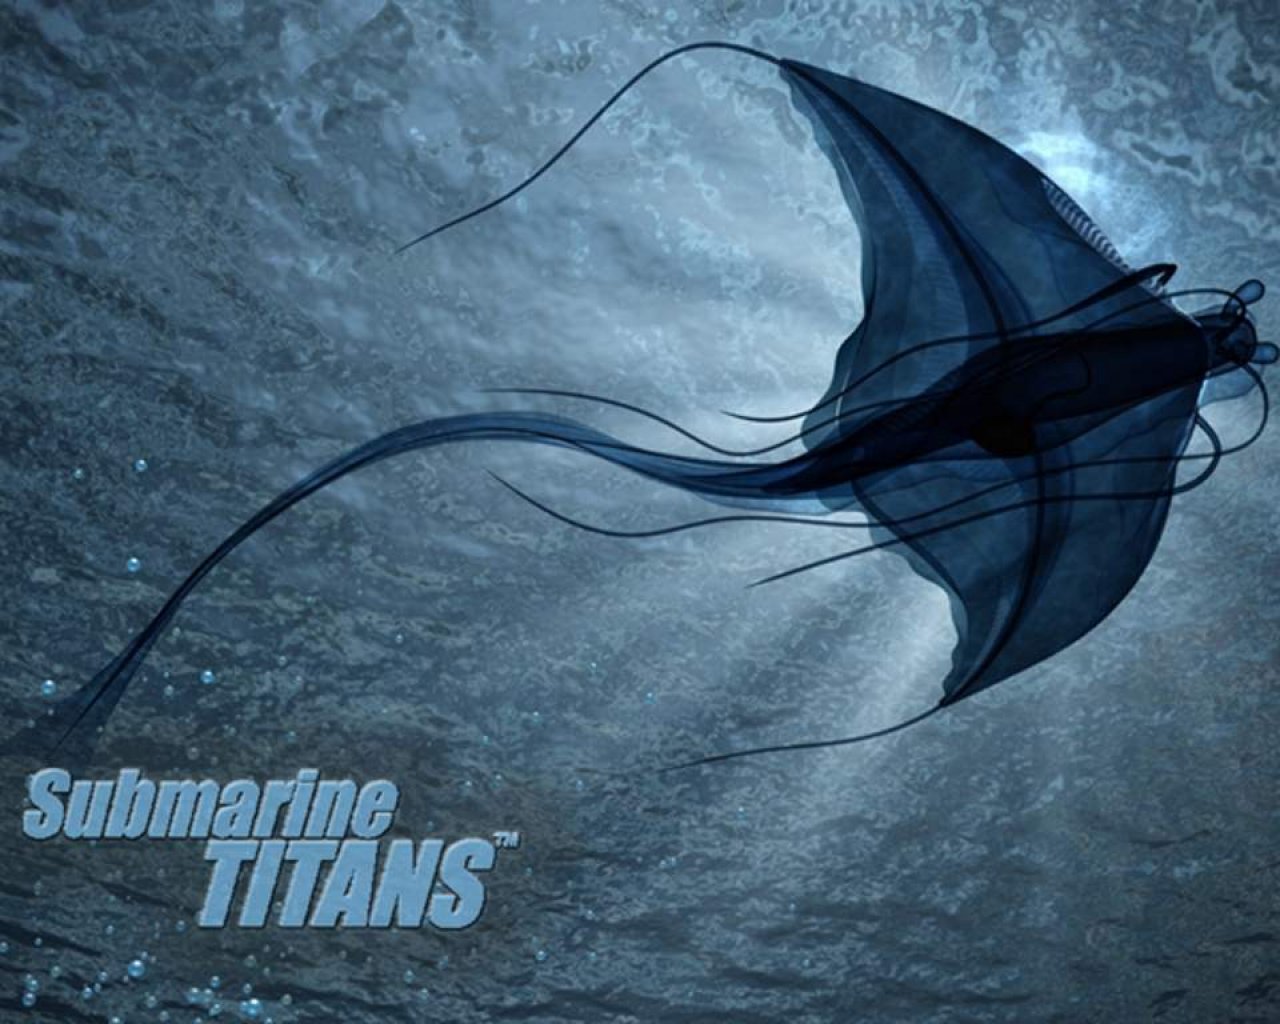 Submarine Titans Wallpapers - Download Submarine Titans Wallpapers 